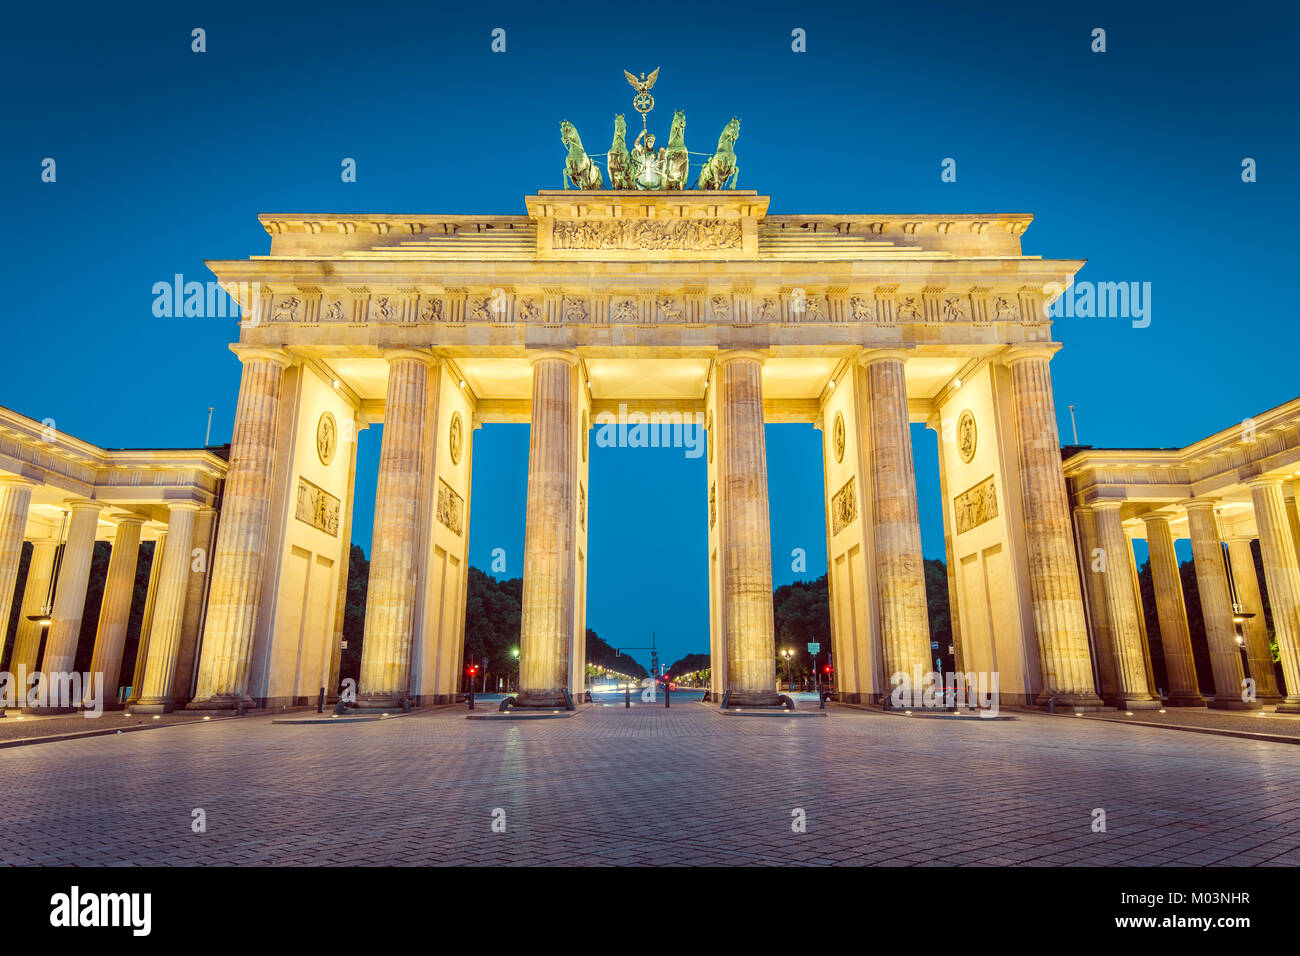 Classic view of famous Brandenburger Tor (Brandenburg Gate), one of the best-known landmarks and national symbols of Germany, in twilight, Berlin Stock Photo